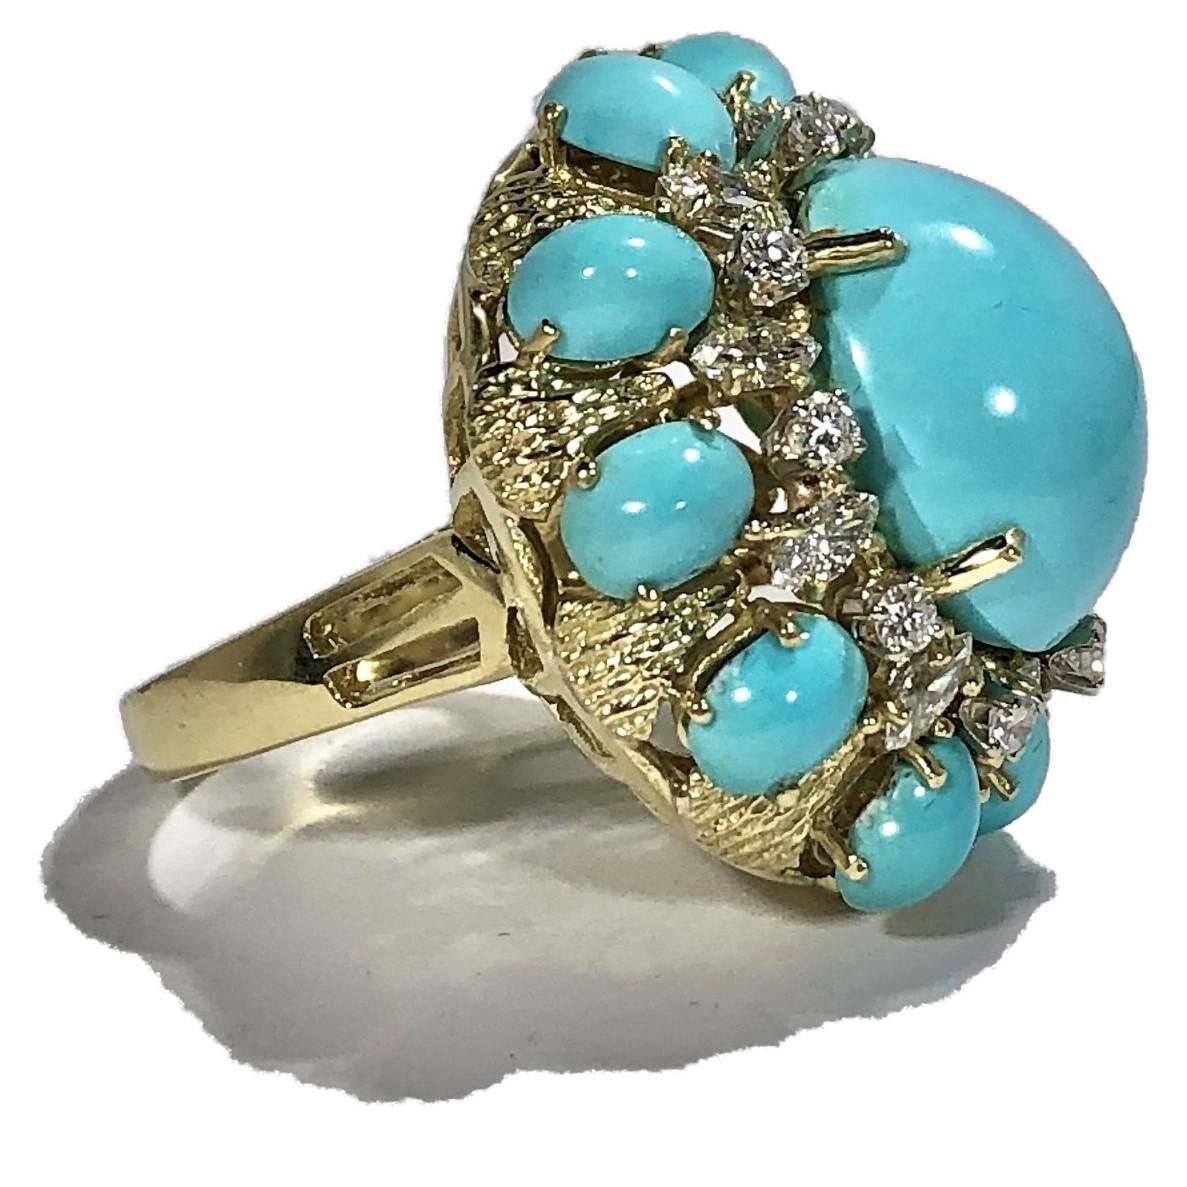 A beautifully crafted large scale, 18K yellow gold cocktail ring featuring a high polished shank and shoulders, with 10 bark finished panels. In the center is 
one oval cabochon turquoise measuring 18mm X 14mm. Surrounding the center turquoise are